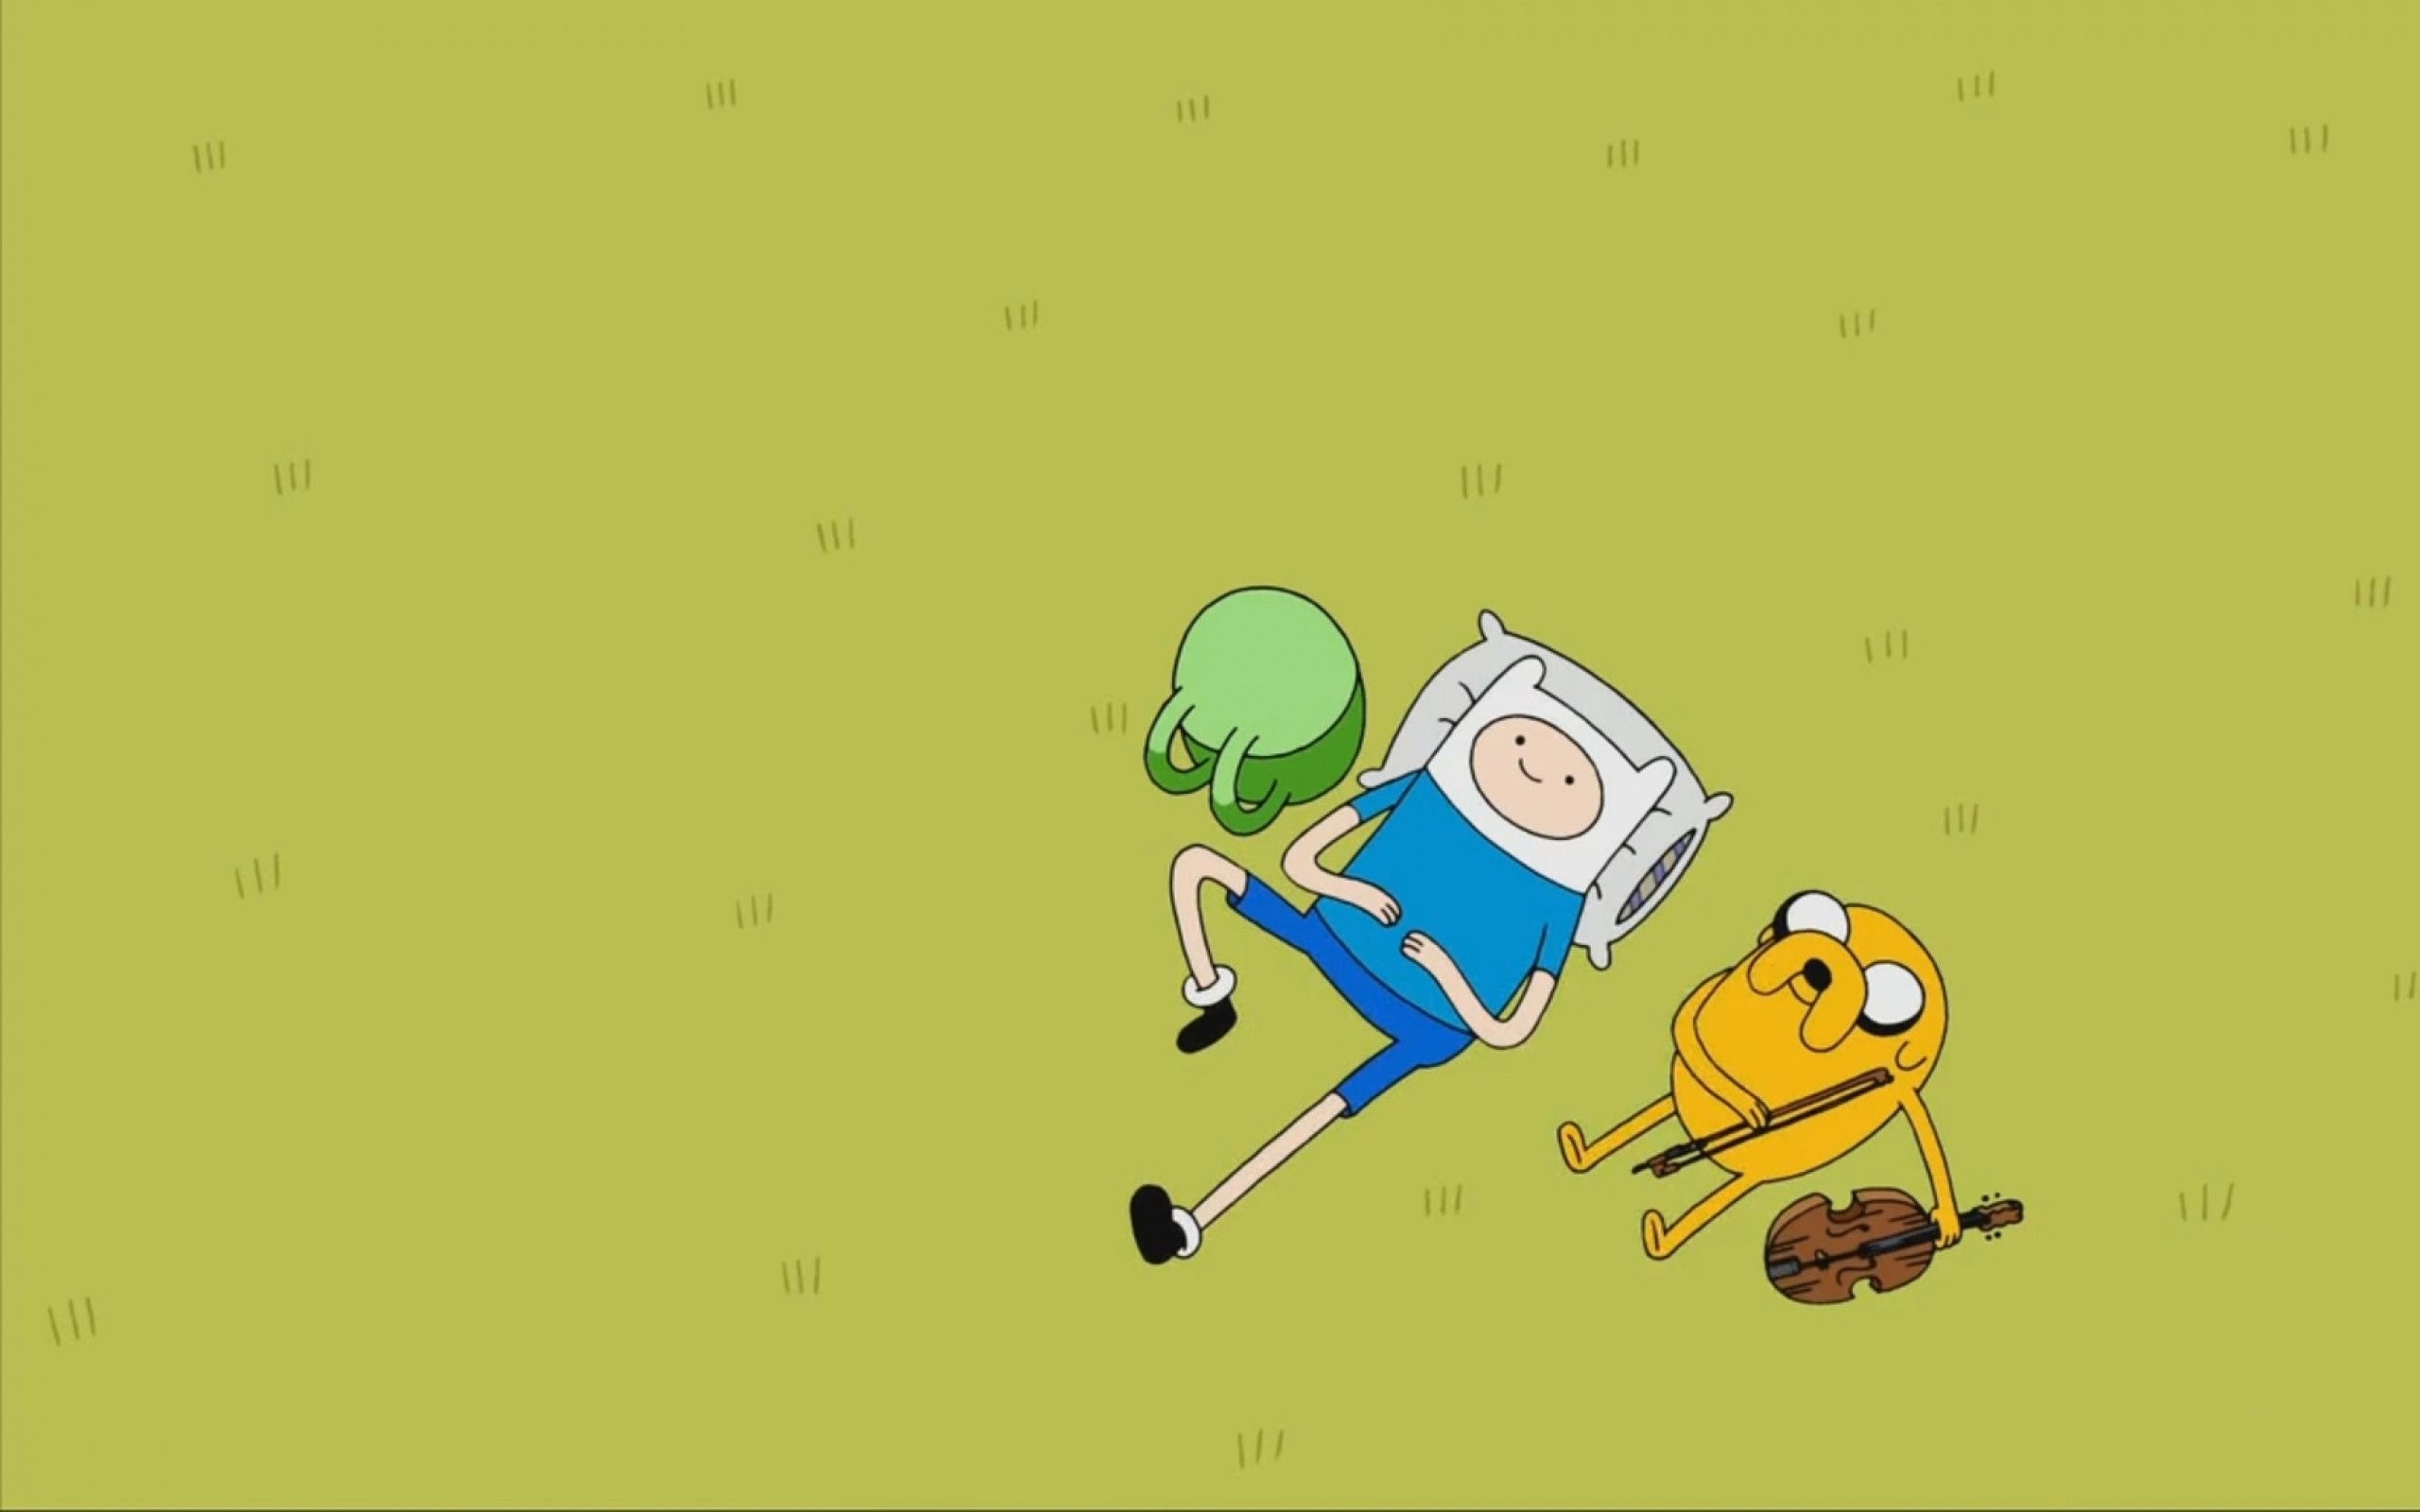 Adventure Time with Finn and Jake wallpapers, HD wallpapers, Jake the dog, Adventure Time iPhone wallpaper, 2560x1600 HD Desktop